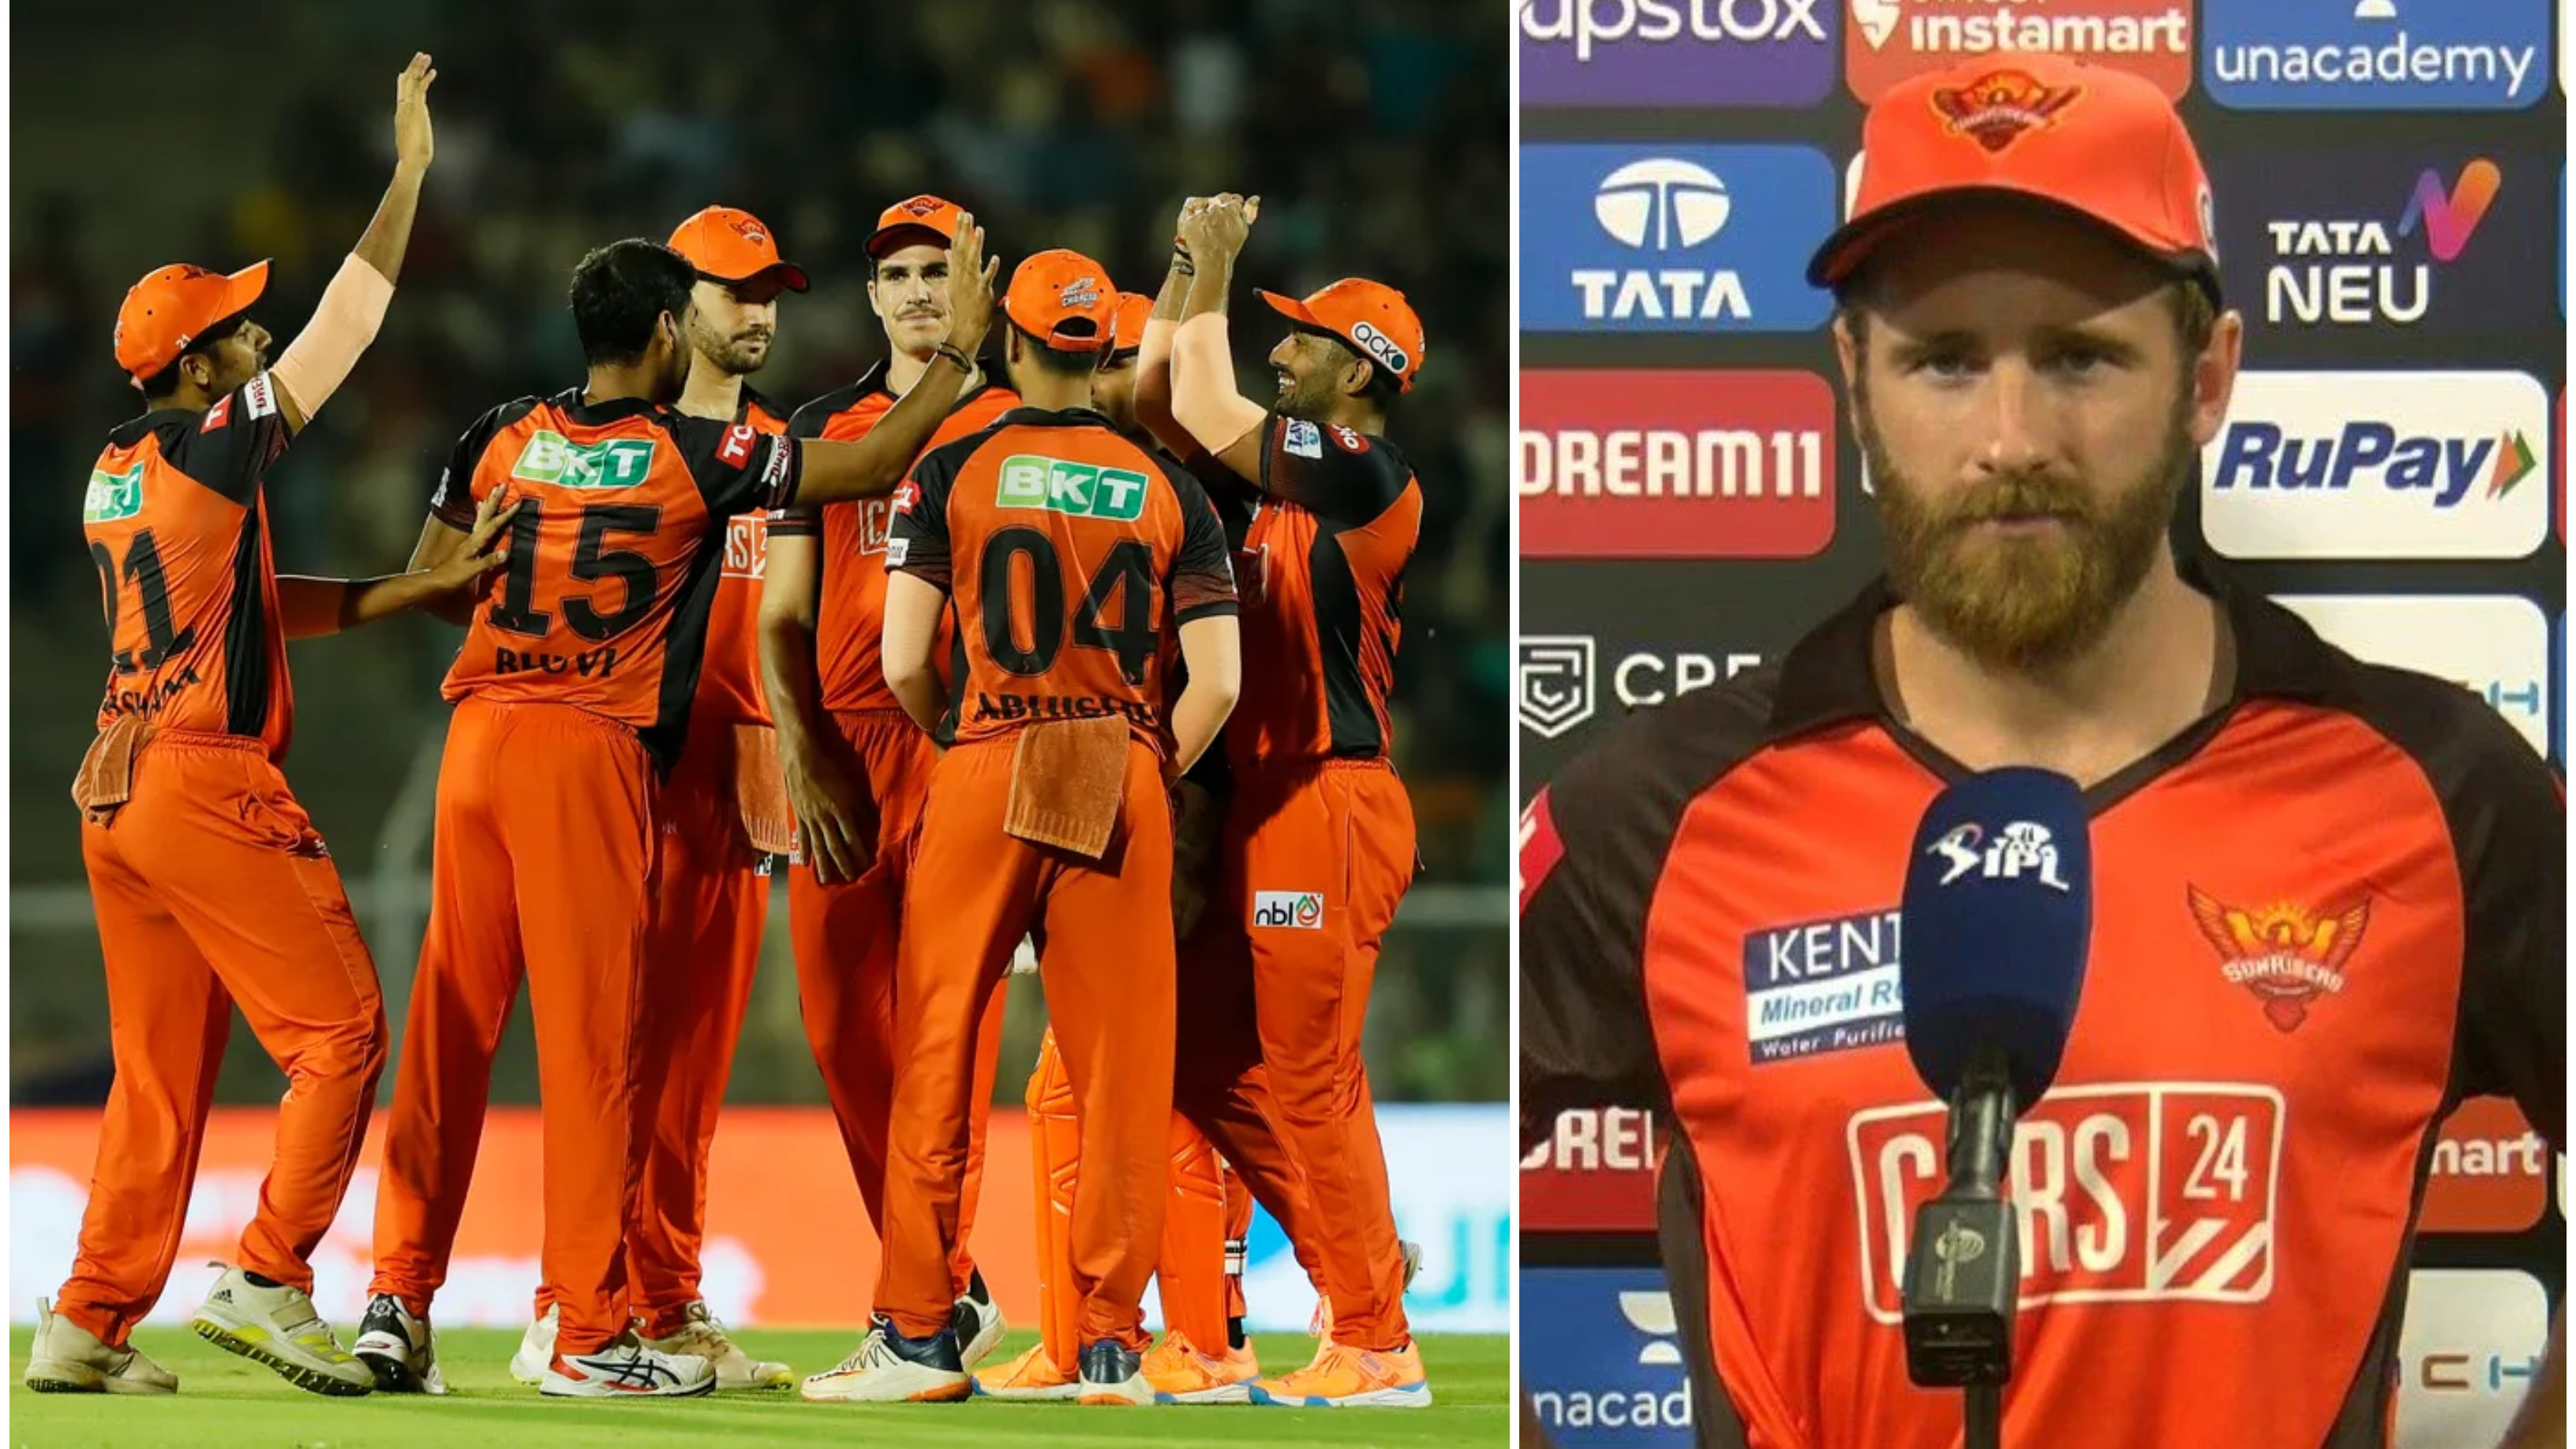 IPL 2022: ‘We were put under pressure as a group’, concedes Williamson after SRH’s big loss to DC